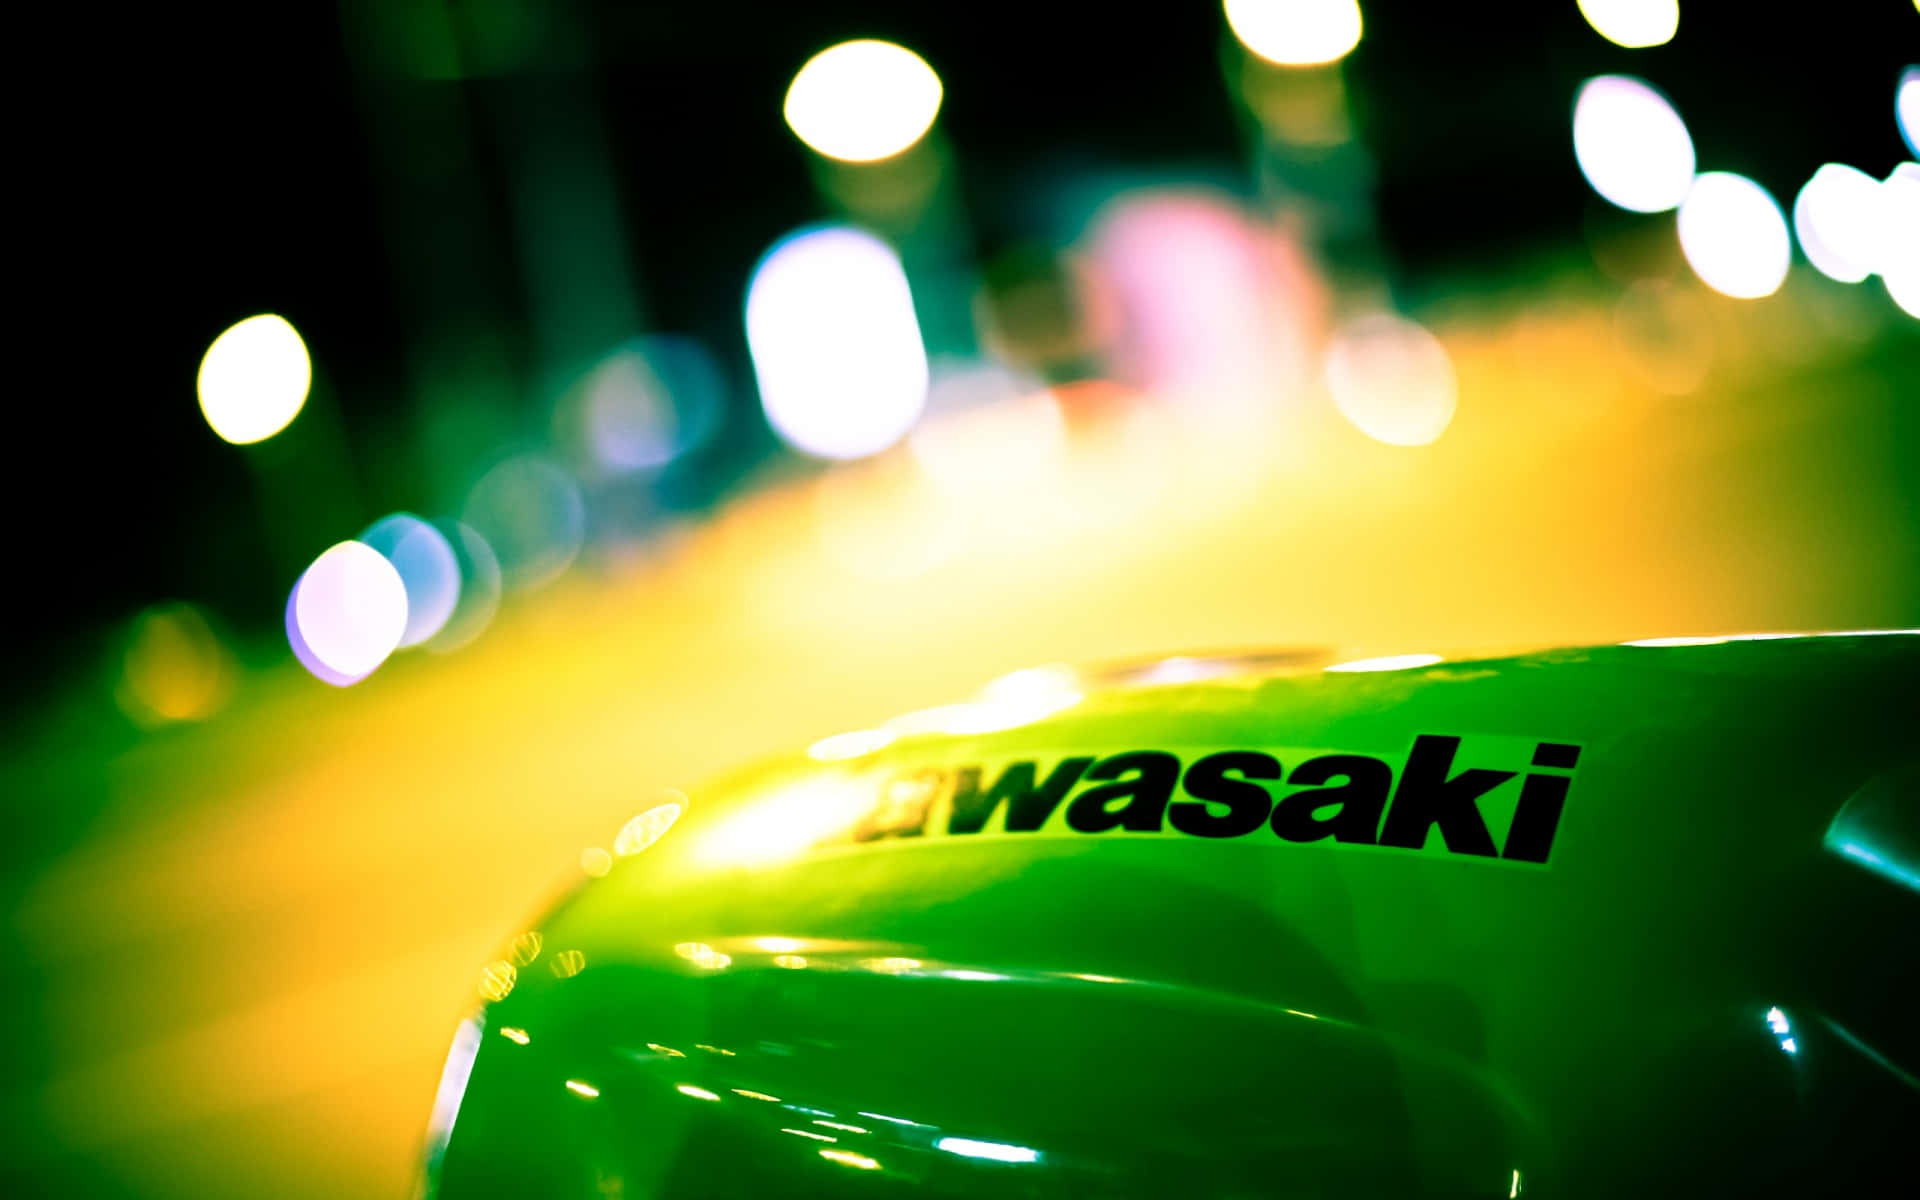 Enjoy The Latest In Computer Technology With The Kawasaki Desktop Wallpaper